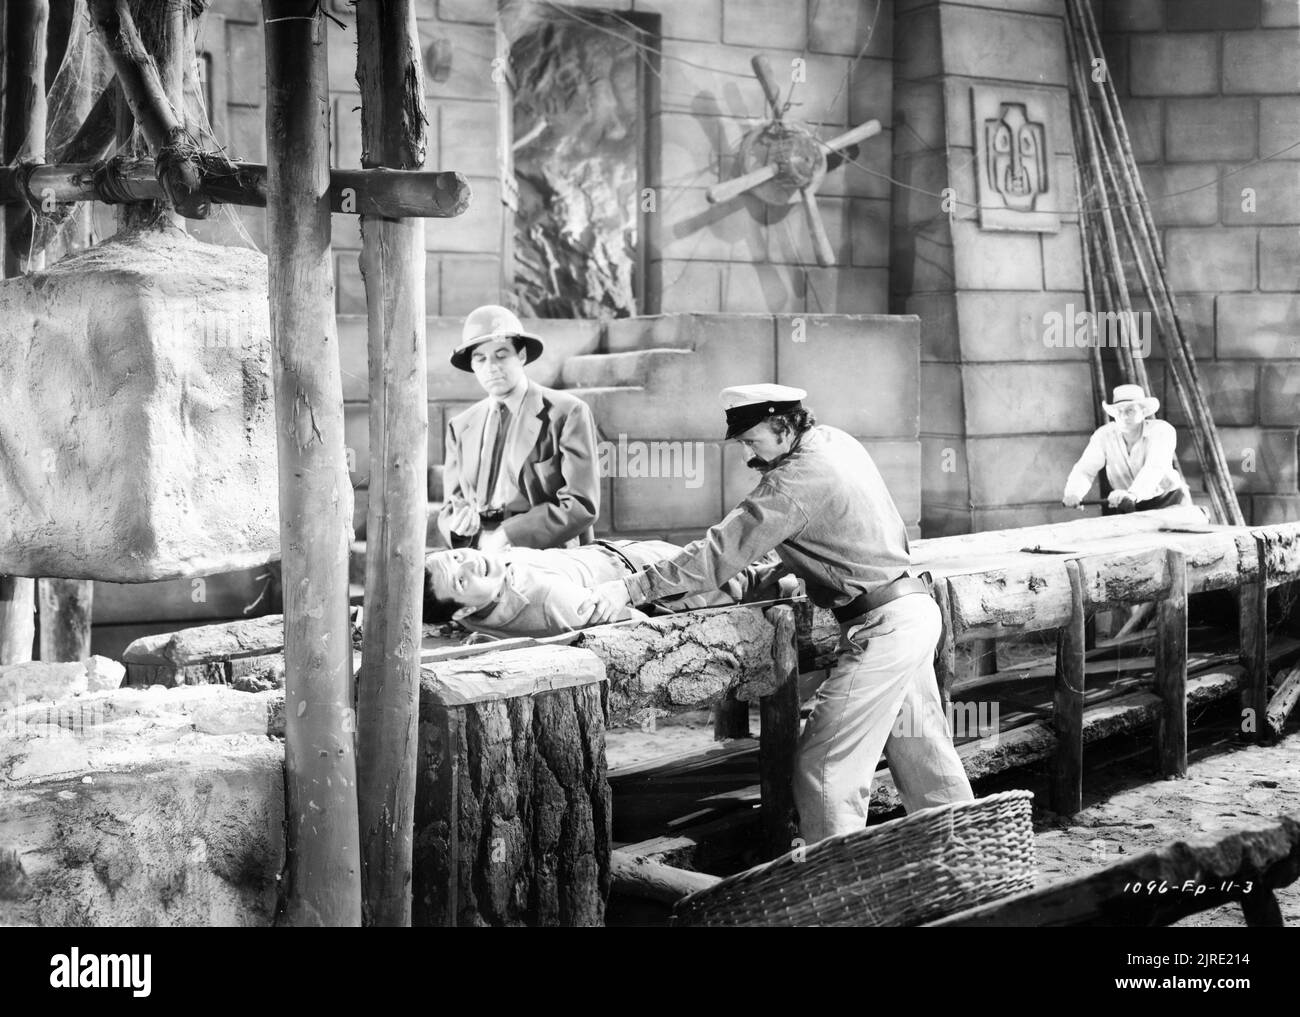 GERALD MOHR as Slick Latimer AL TAYLOR as Claggett and BUD GEARY as Brock torture TOM NEAL as Jack Stanton in Episode 11 of the 15 Chapter Serial JUNGLE GIRL 1941 directors JOHN ENGLISH and WILLIAM WITNEY based loosely on the novel by Edgar Rice Burroughs set decoration Morris Braun associate producer Hiram S. Brown Jr. Republic Pictures Stock Photo